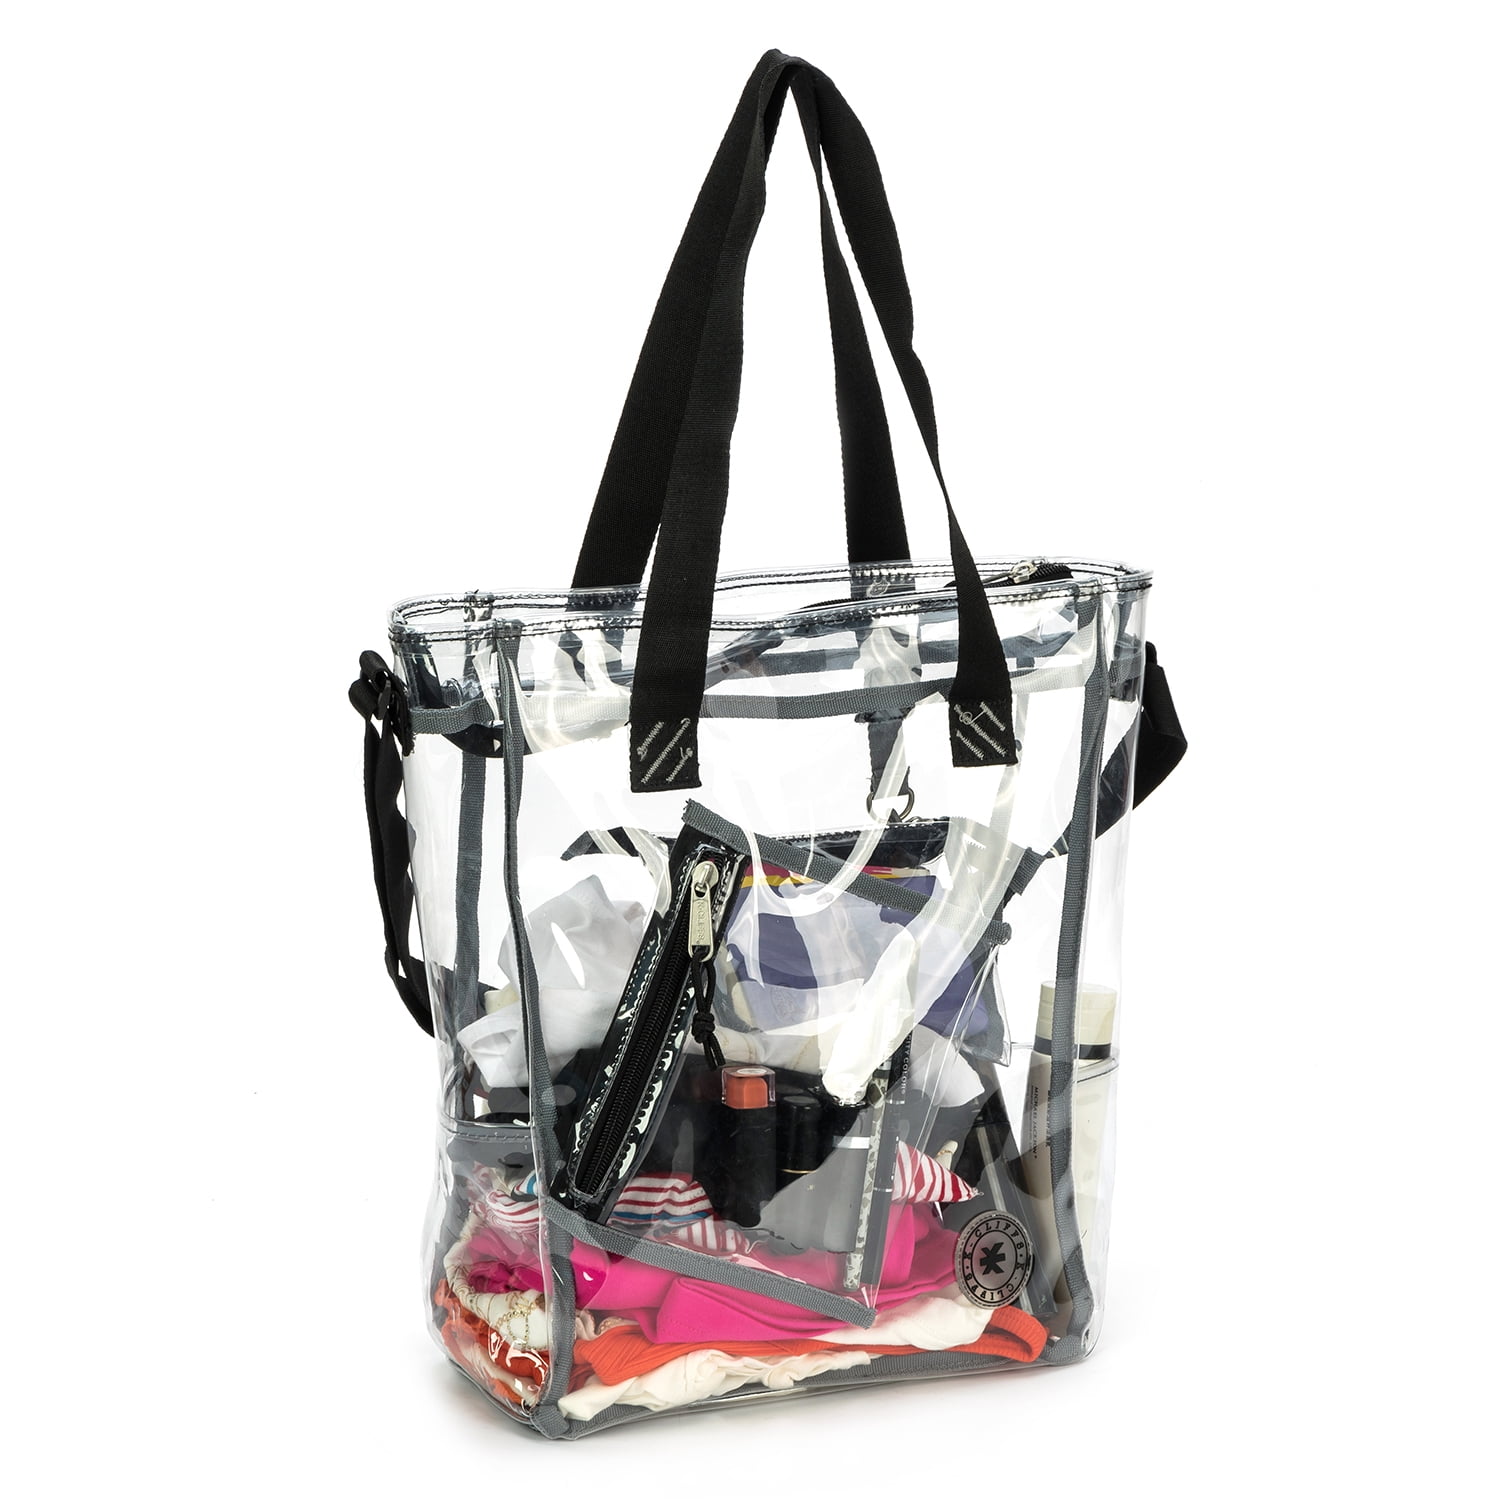 K-cliffs 12 inch Clear PVC Messenger Bag Heavy Duty See Through Tote. Stadium Approved Handbag Transparent Pouch Hand Bags Top Handle & Adjustable